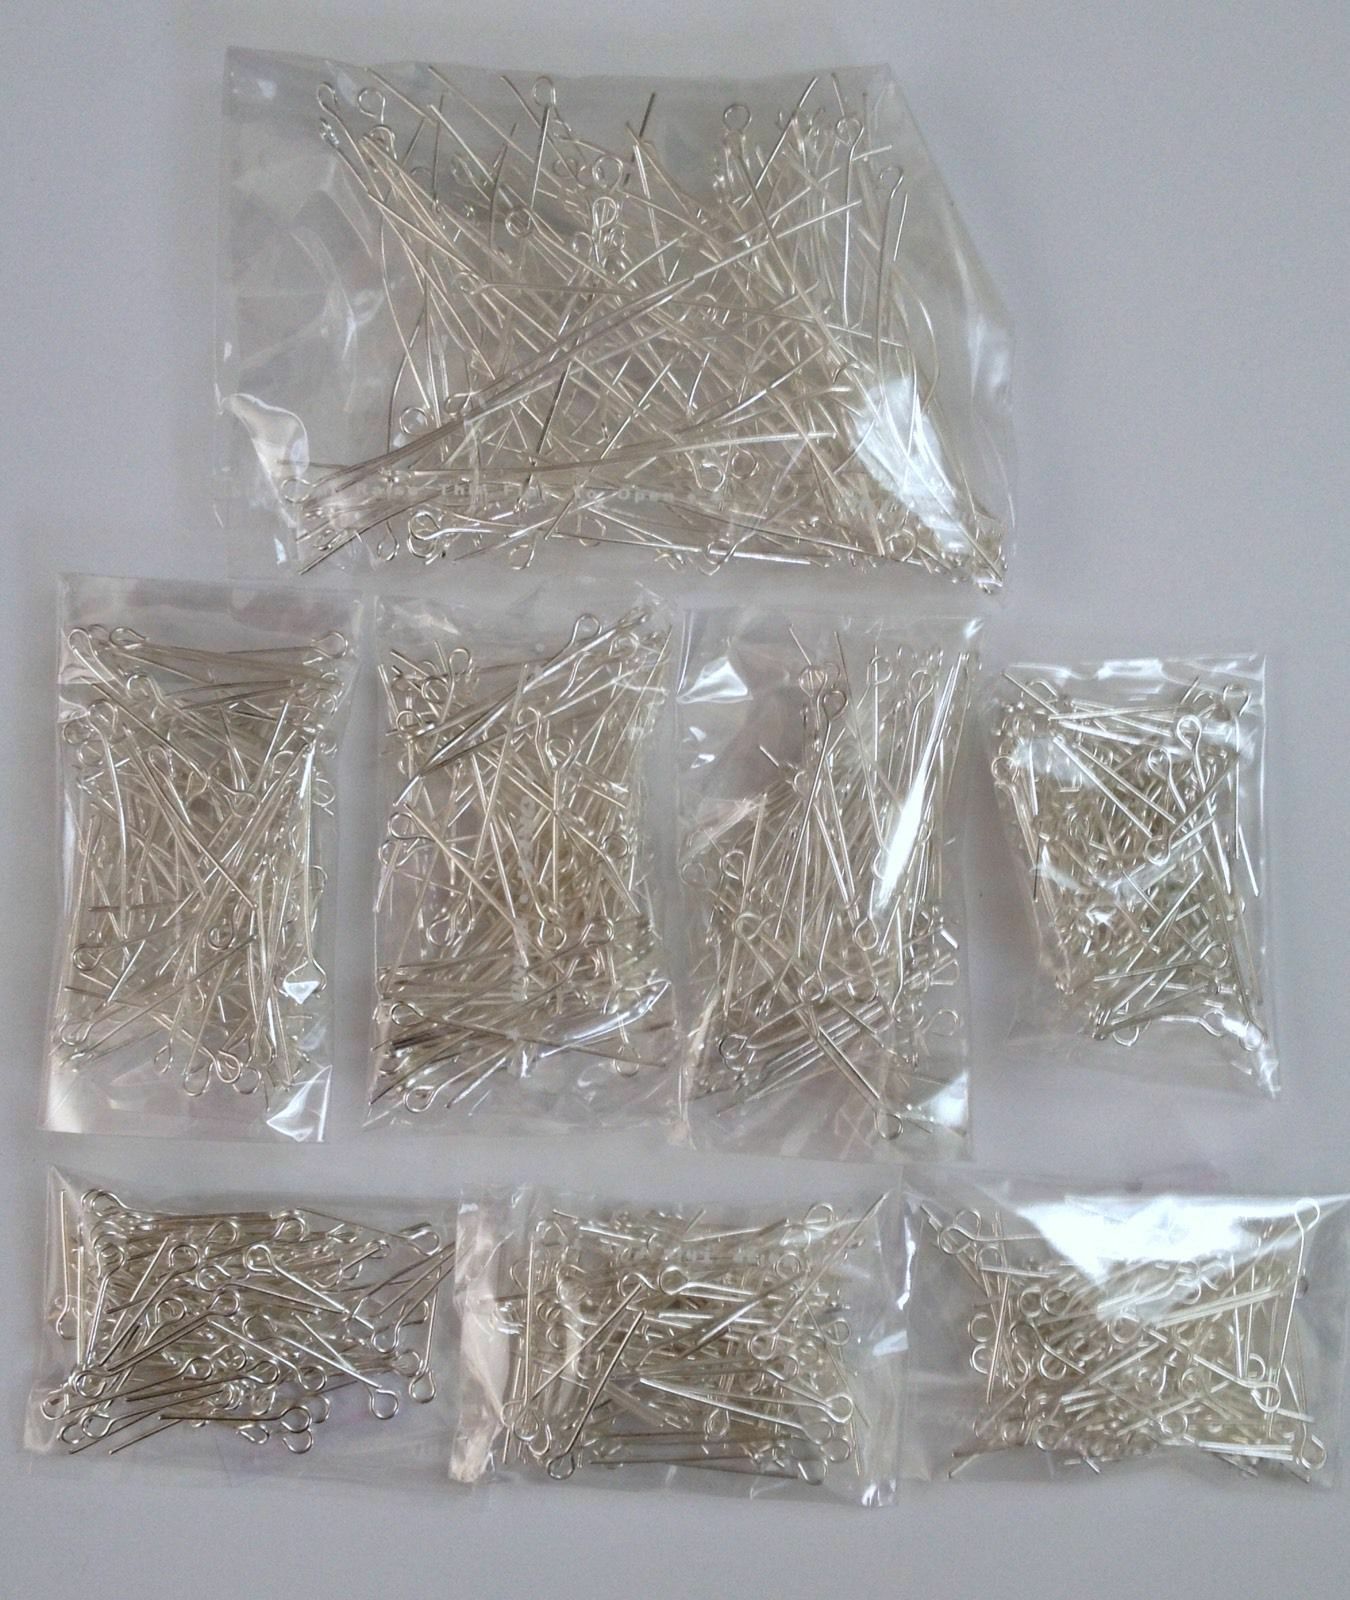 New 700 Pcs 7 Size Silver Plated Eye Pins Jewelry 16 18 20 22 26 28 30 Mm #36